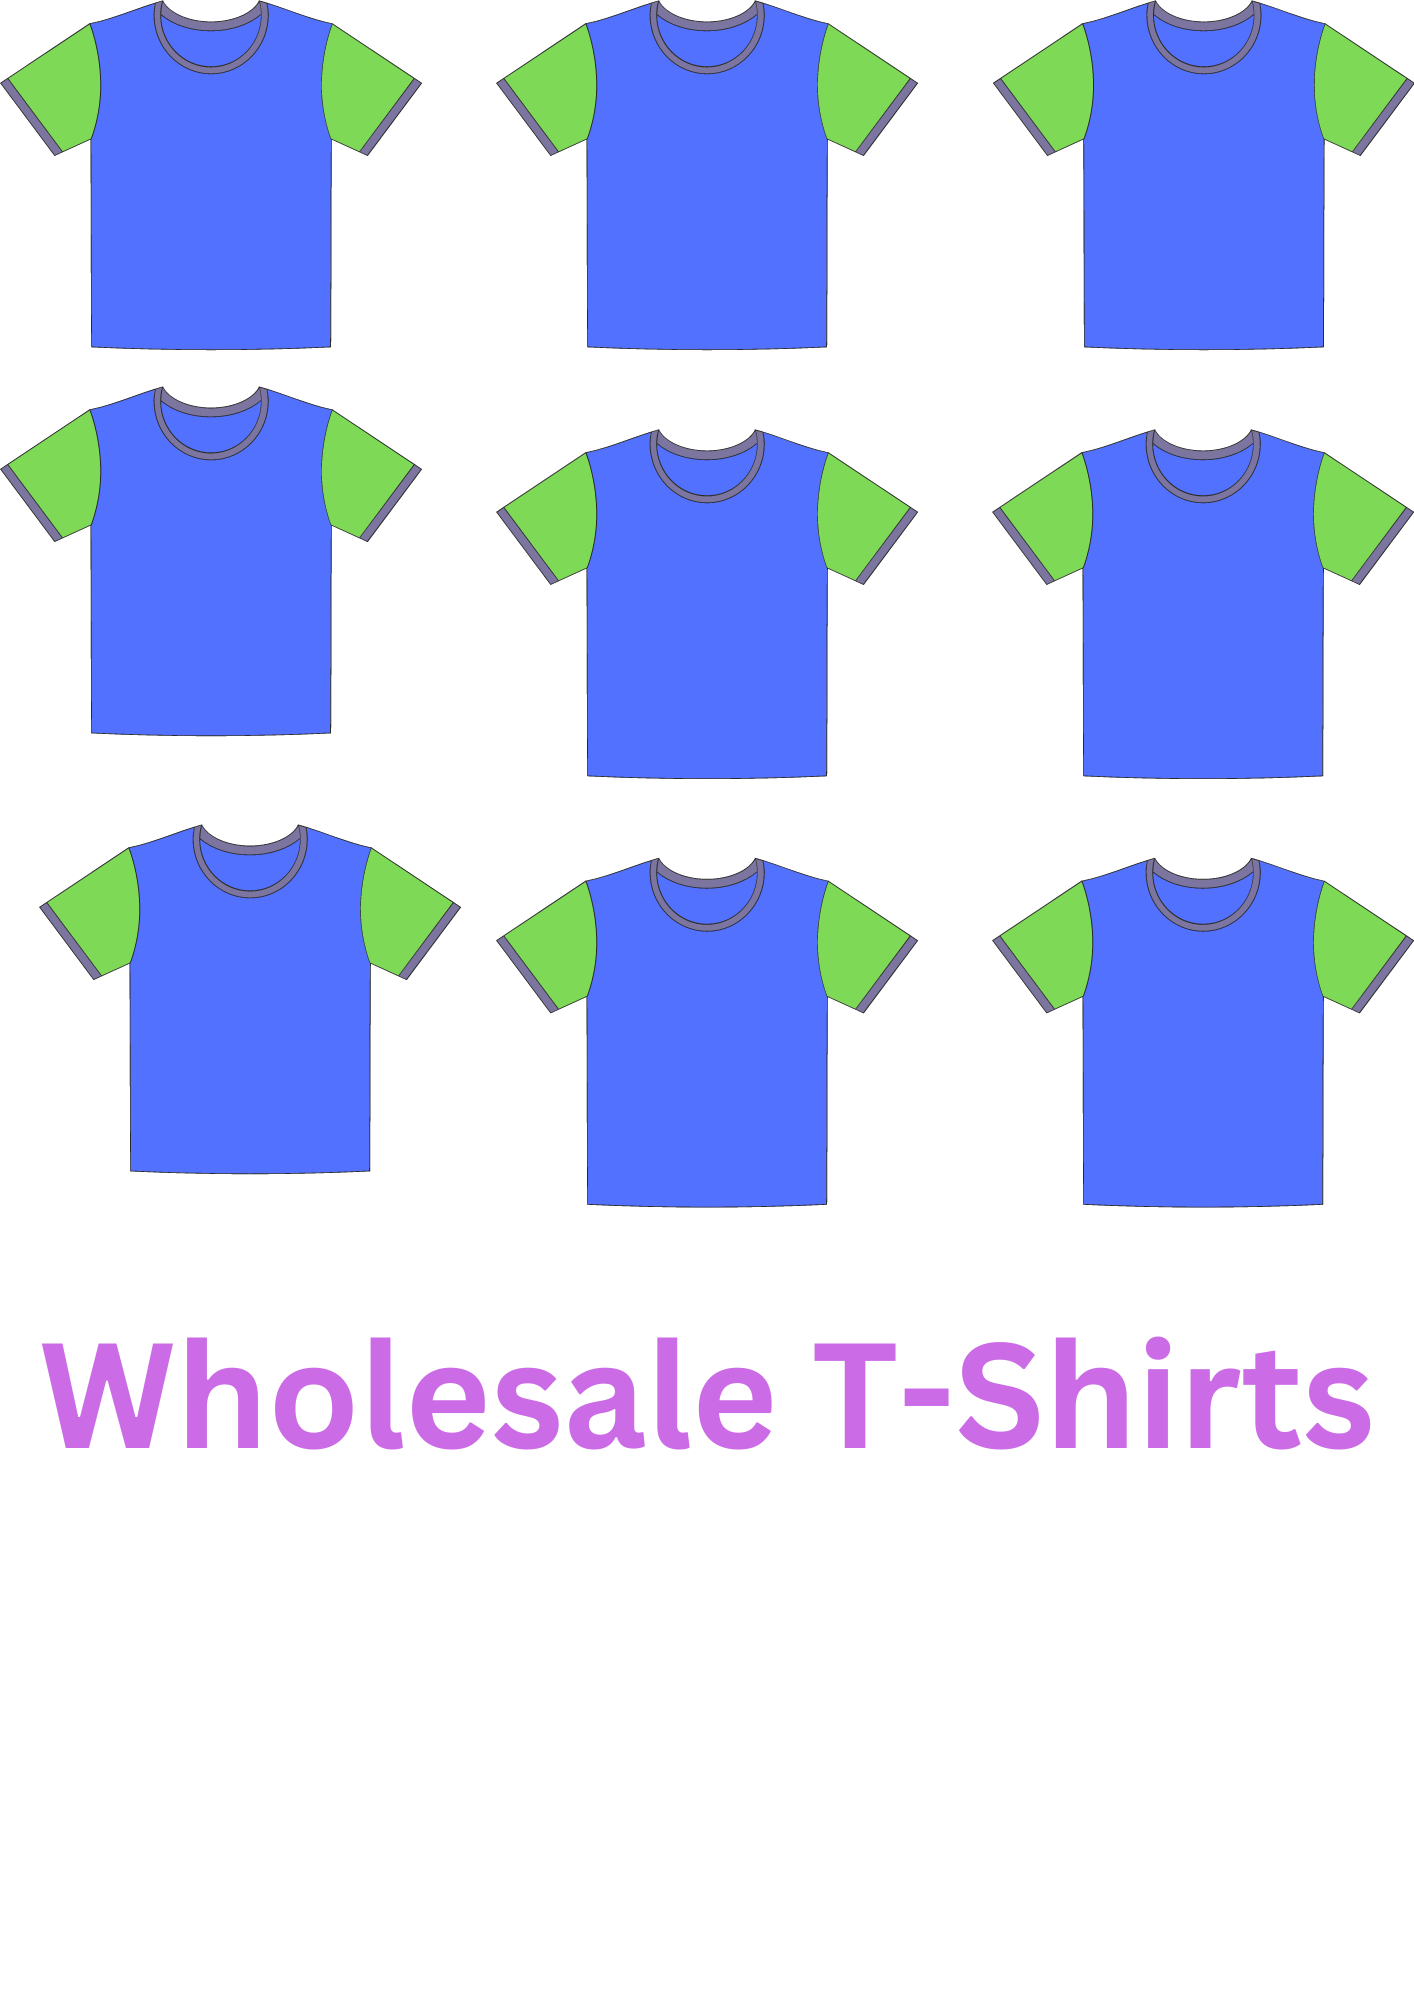 Affordable wholesale t-shirts for your business